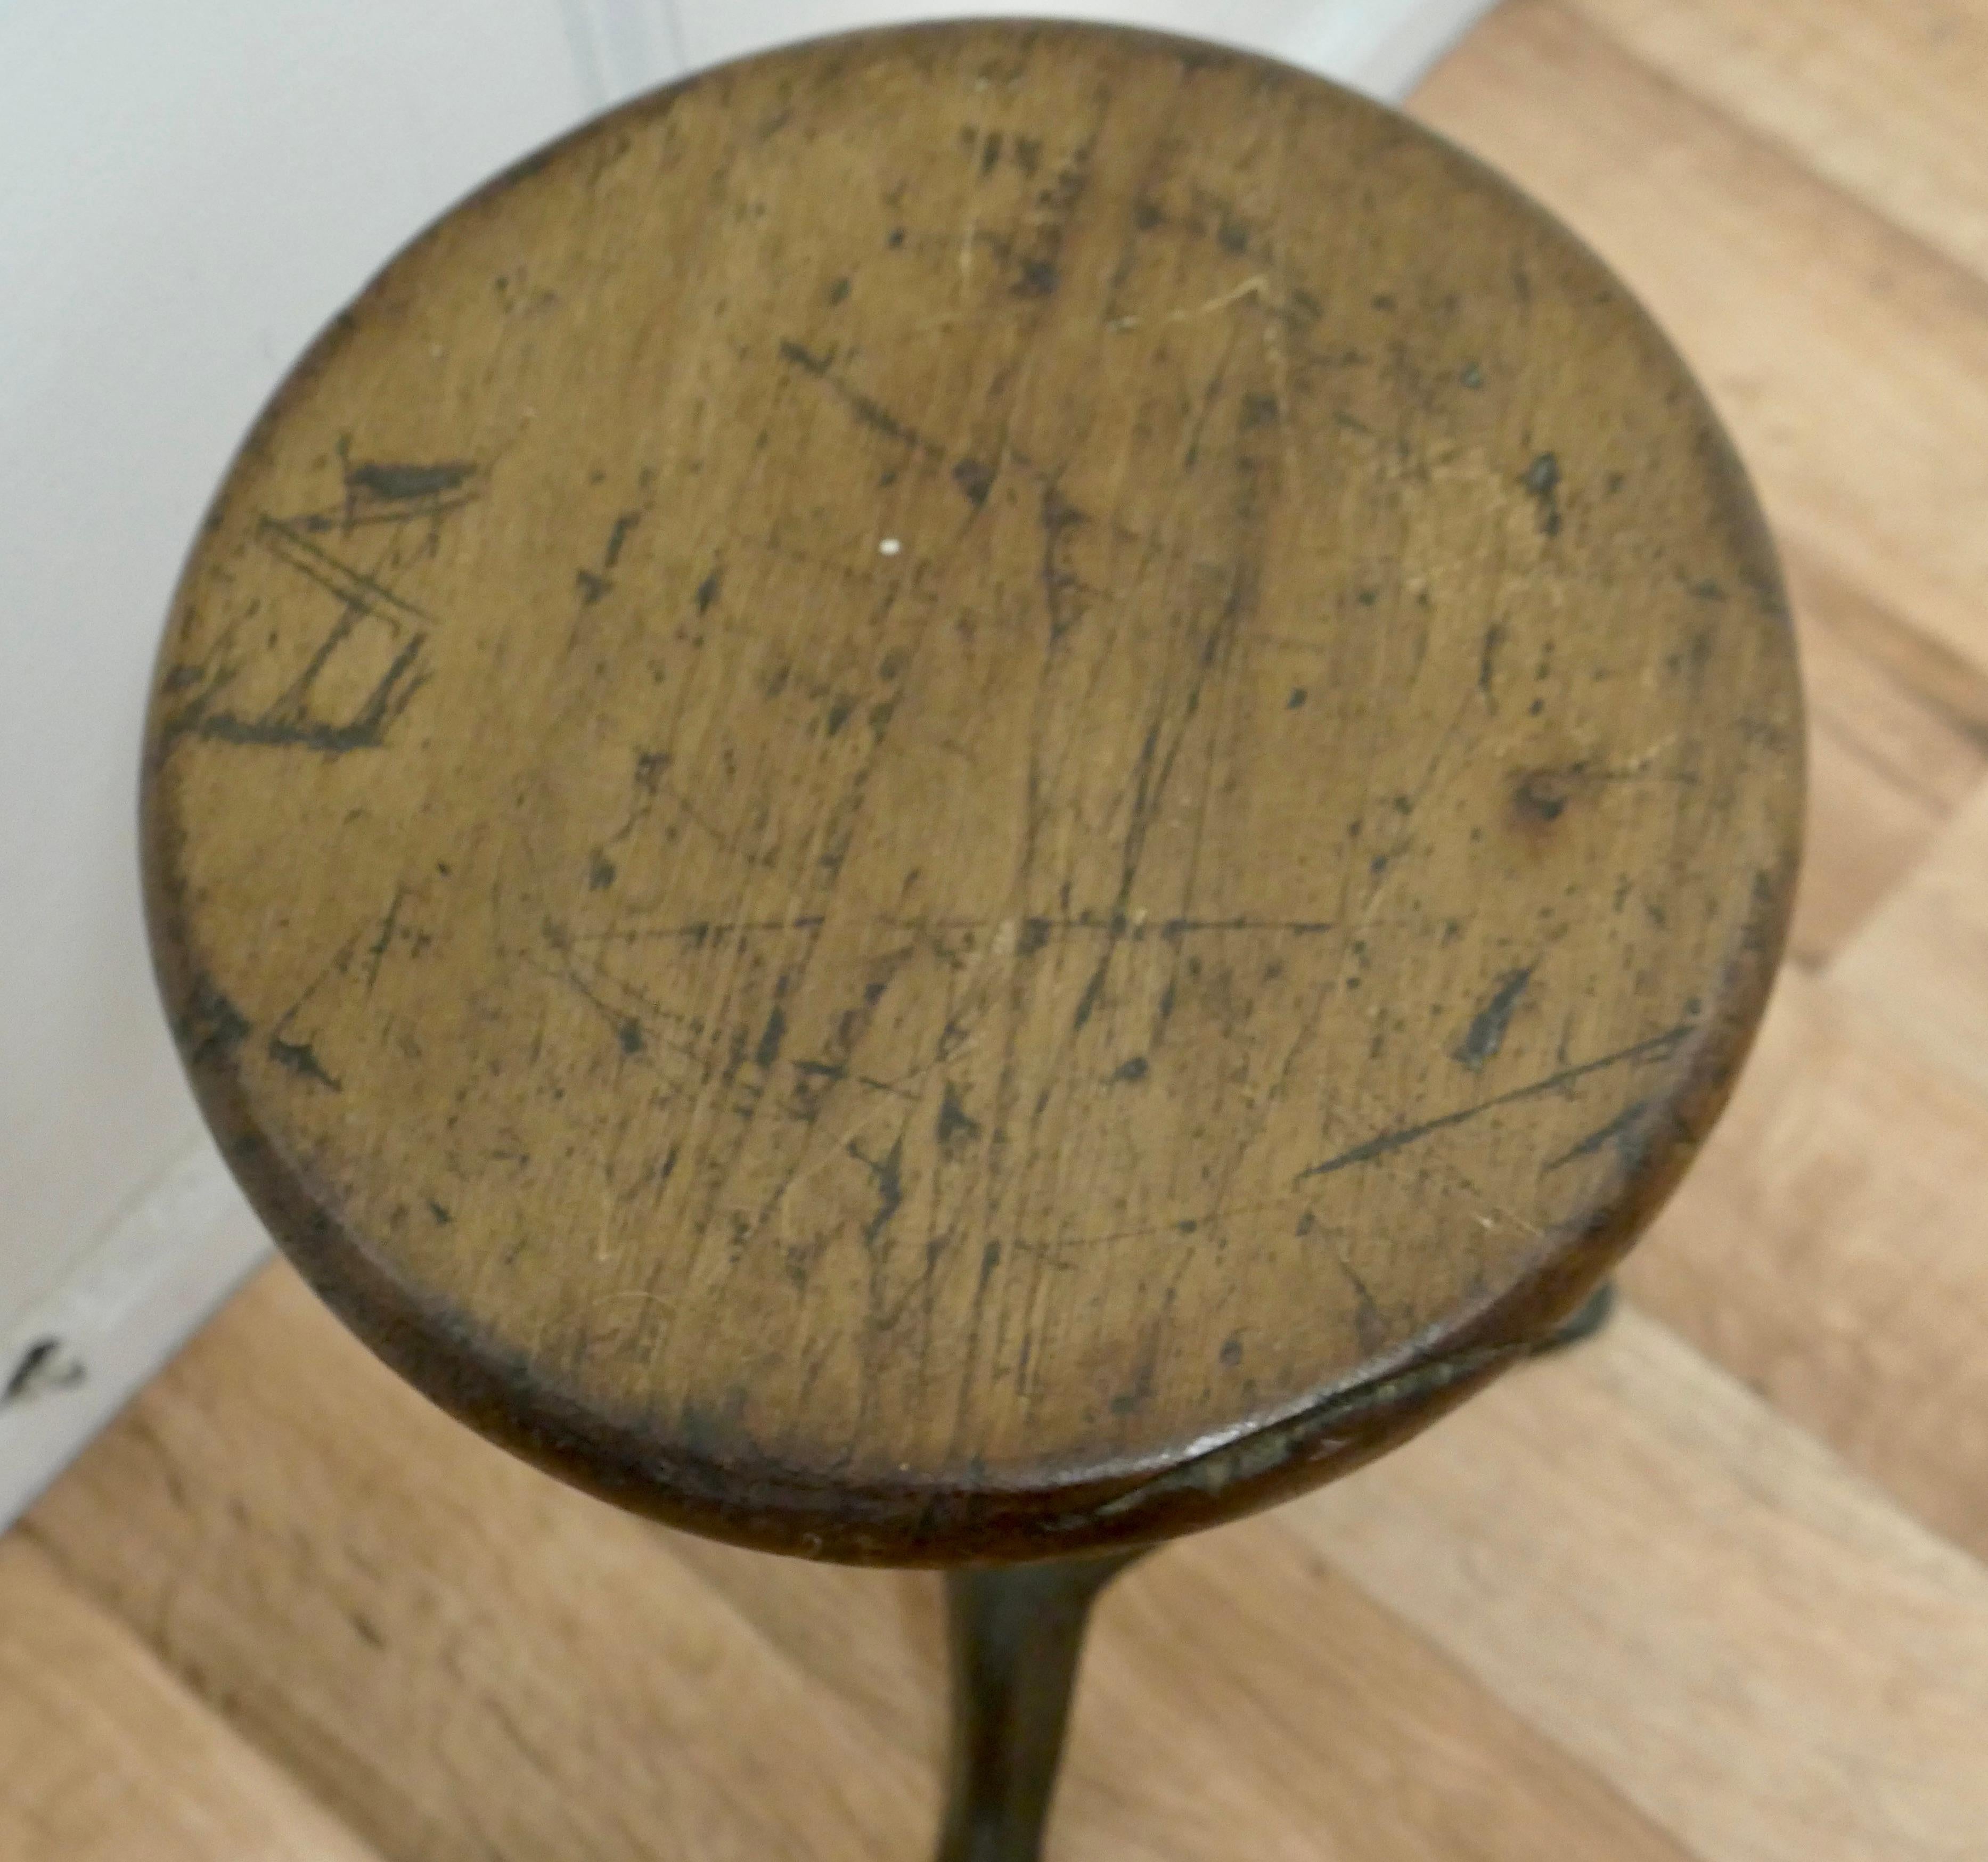 1920's Iron and pine machinist’s revolving stool.


An original Industrial machinist stool with heavy cast iron base and a 1.5” thick, round wooden seat.
The stool revolves on a giant screw making it adjustable in height.
The stool is in good